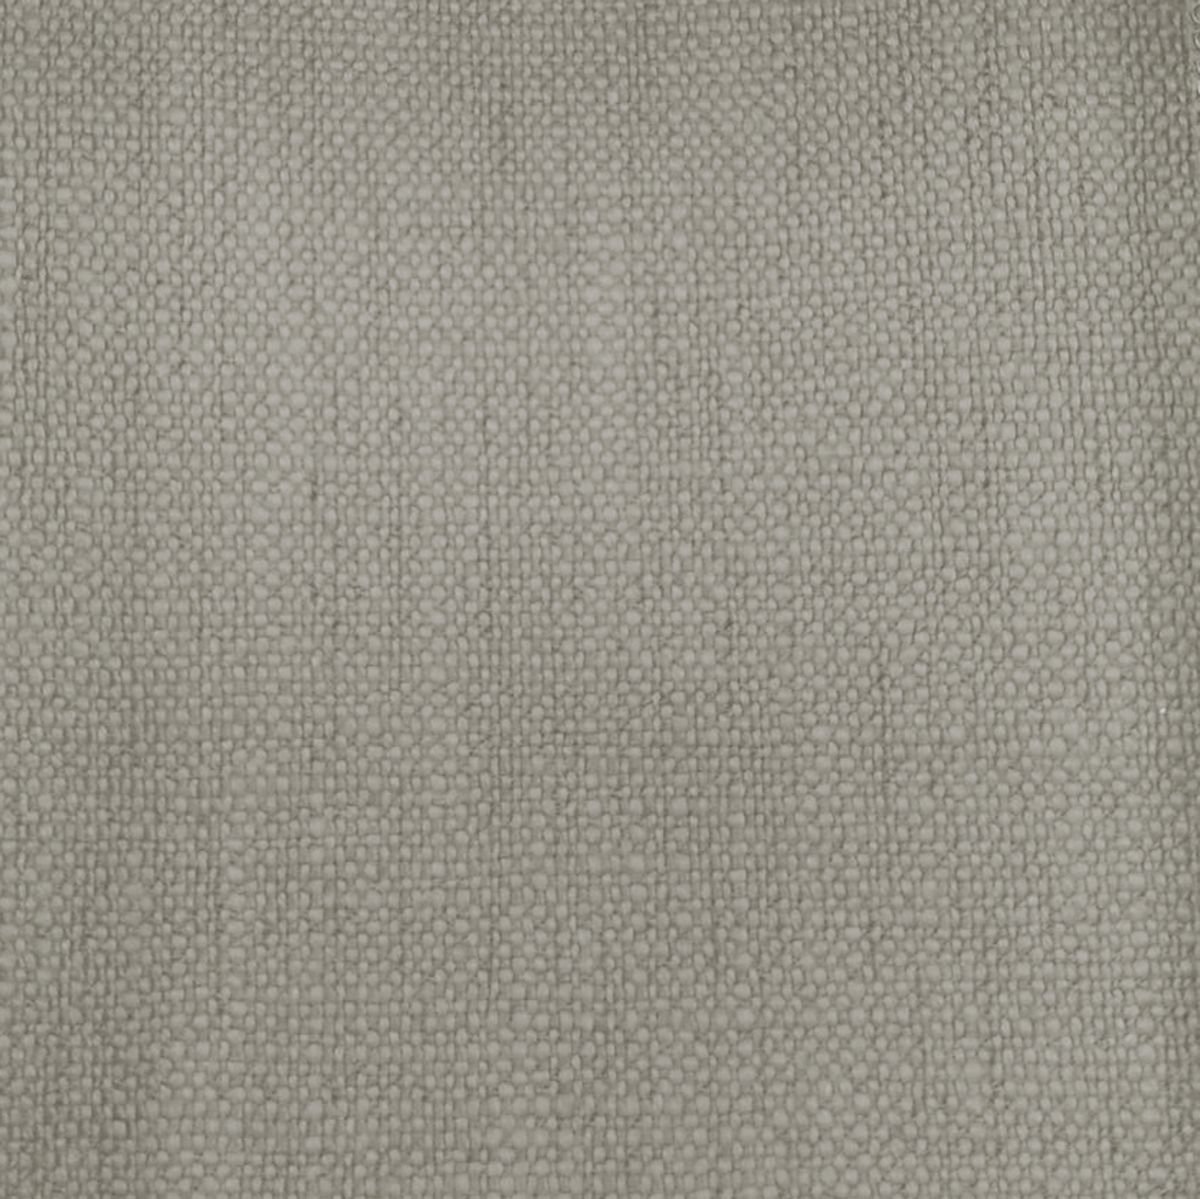 Trento Natural Fabric by Voyage Maison